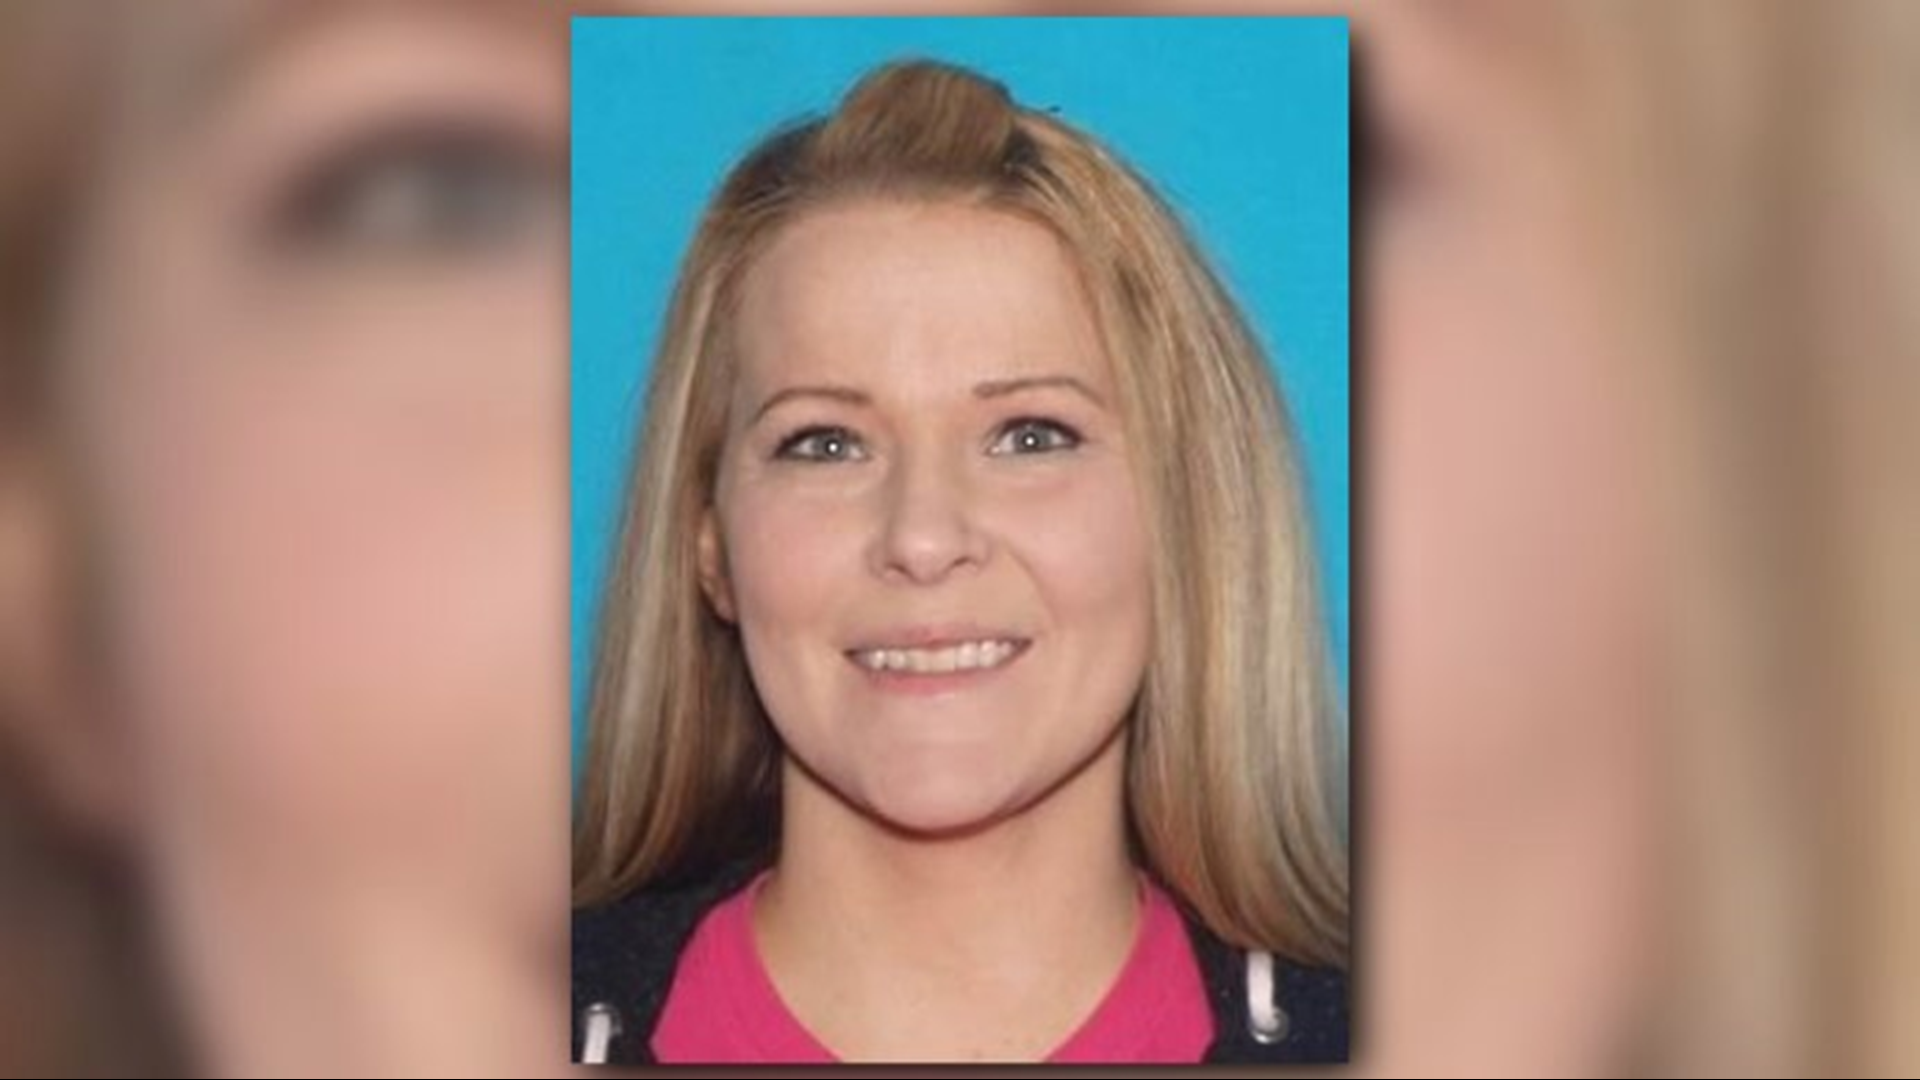 The vehicle of a missing Missouri woman was discovered in Mississippi County on Monday, Dec. 9 on a exit ramp of I-55 near Joiner, AR.